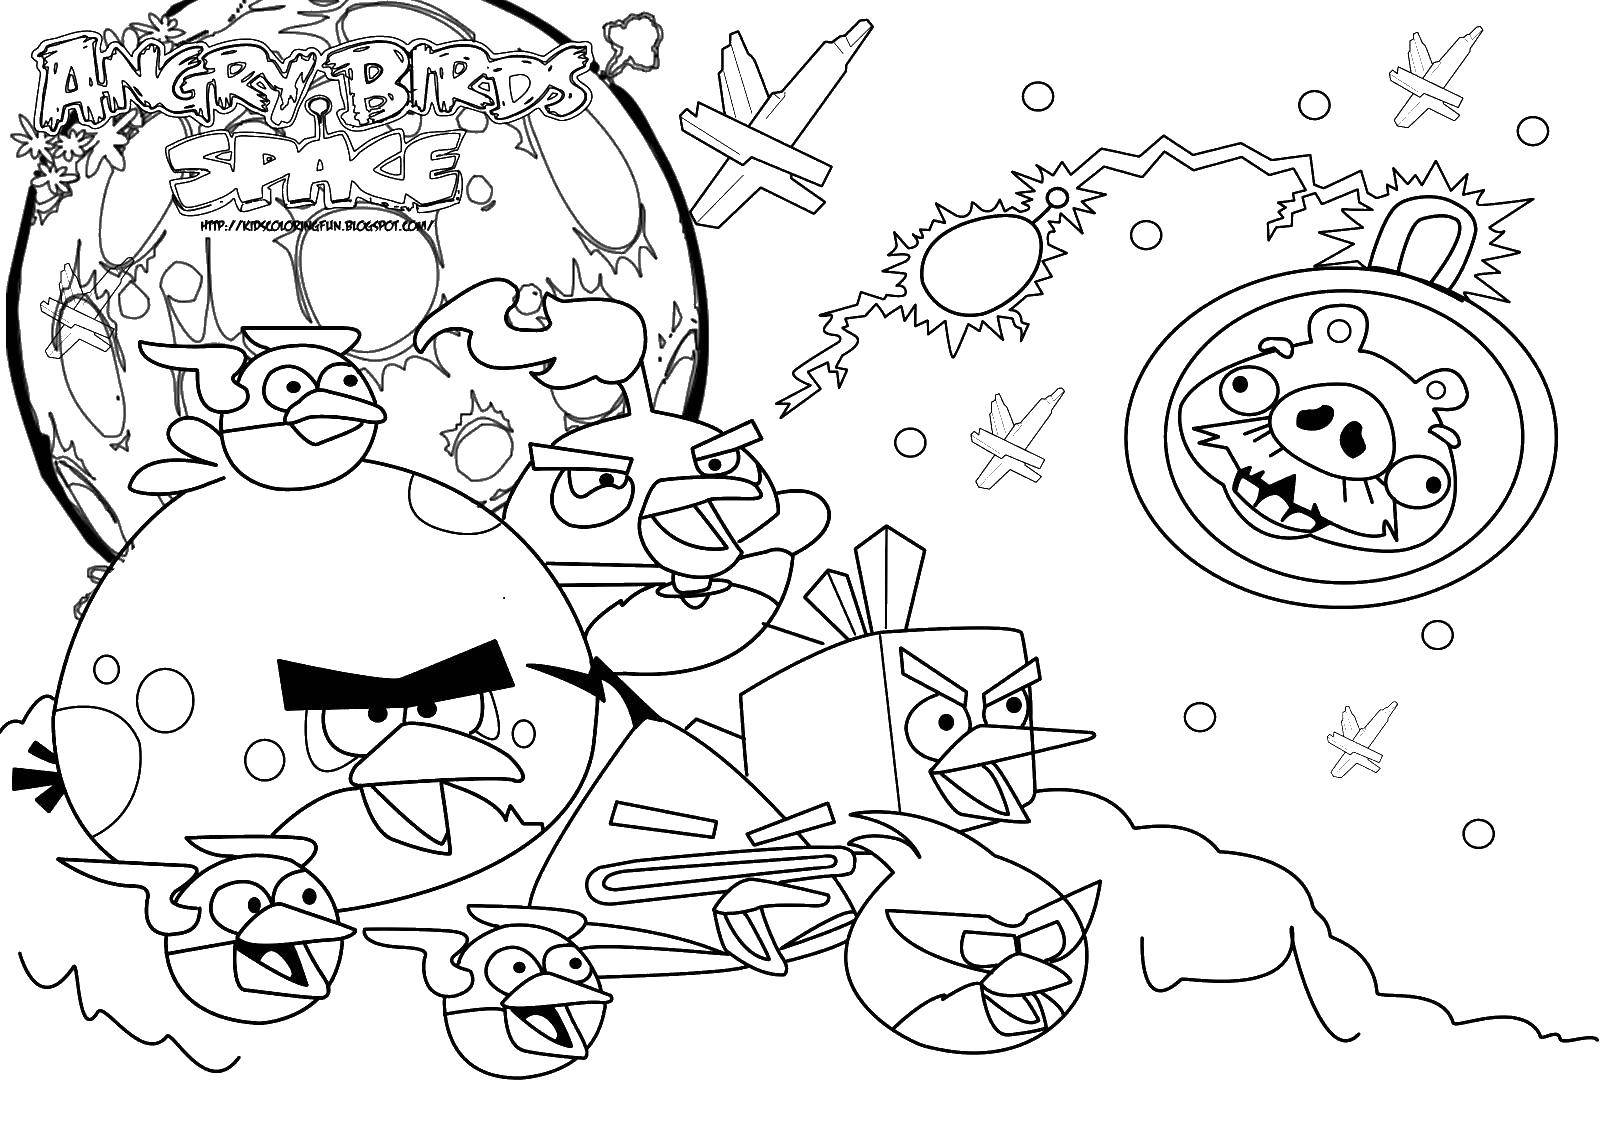 Coloring Angry birds game. Category angry birds. Tags:  angry birds, pig, bird.